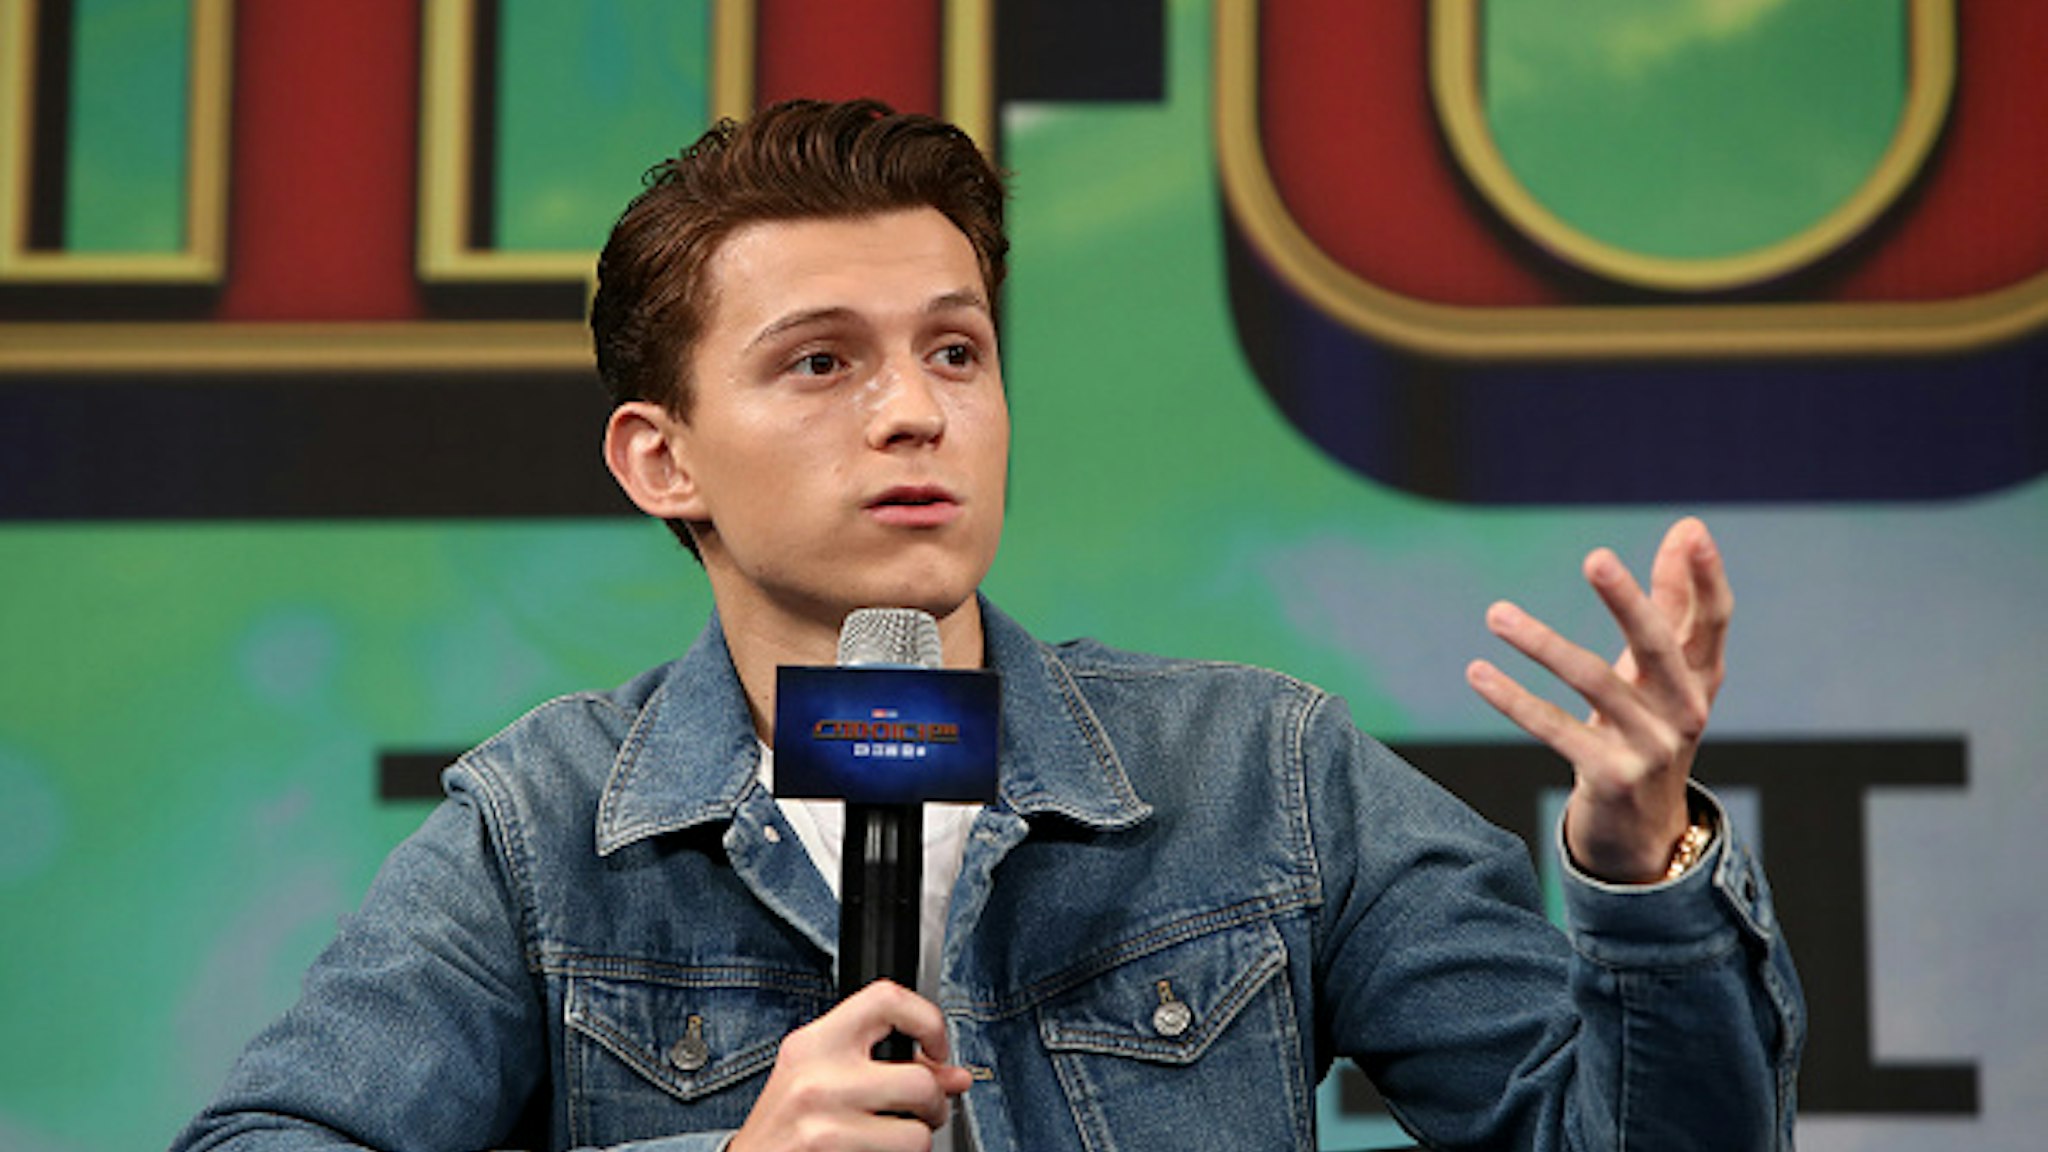 SEOUL, SOUTH KOREA - JULY 01: Actor Tom Holland attends the press conference for 'Spider-Man: Far From Home' South Korea Premiere on July 01, 2019 in Seoul, South Korea.